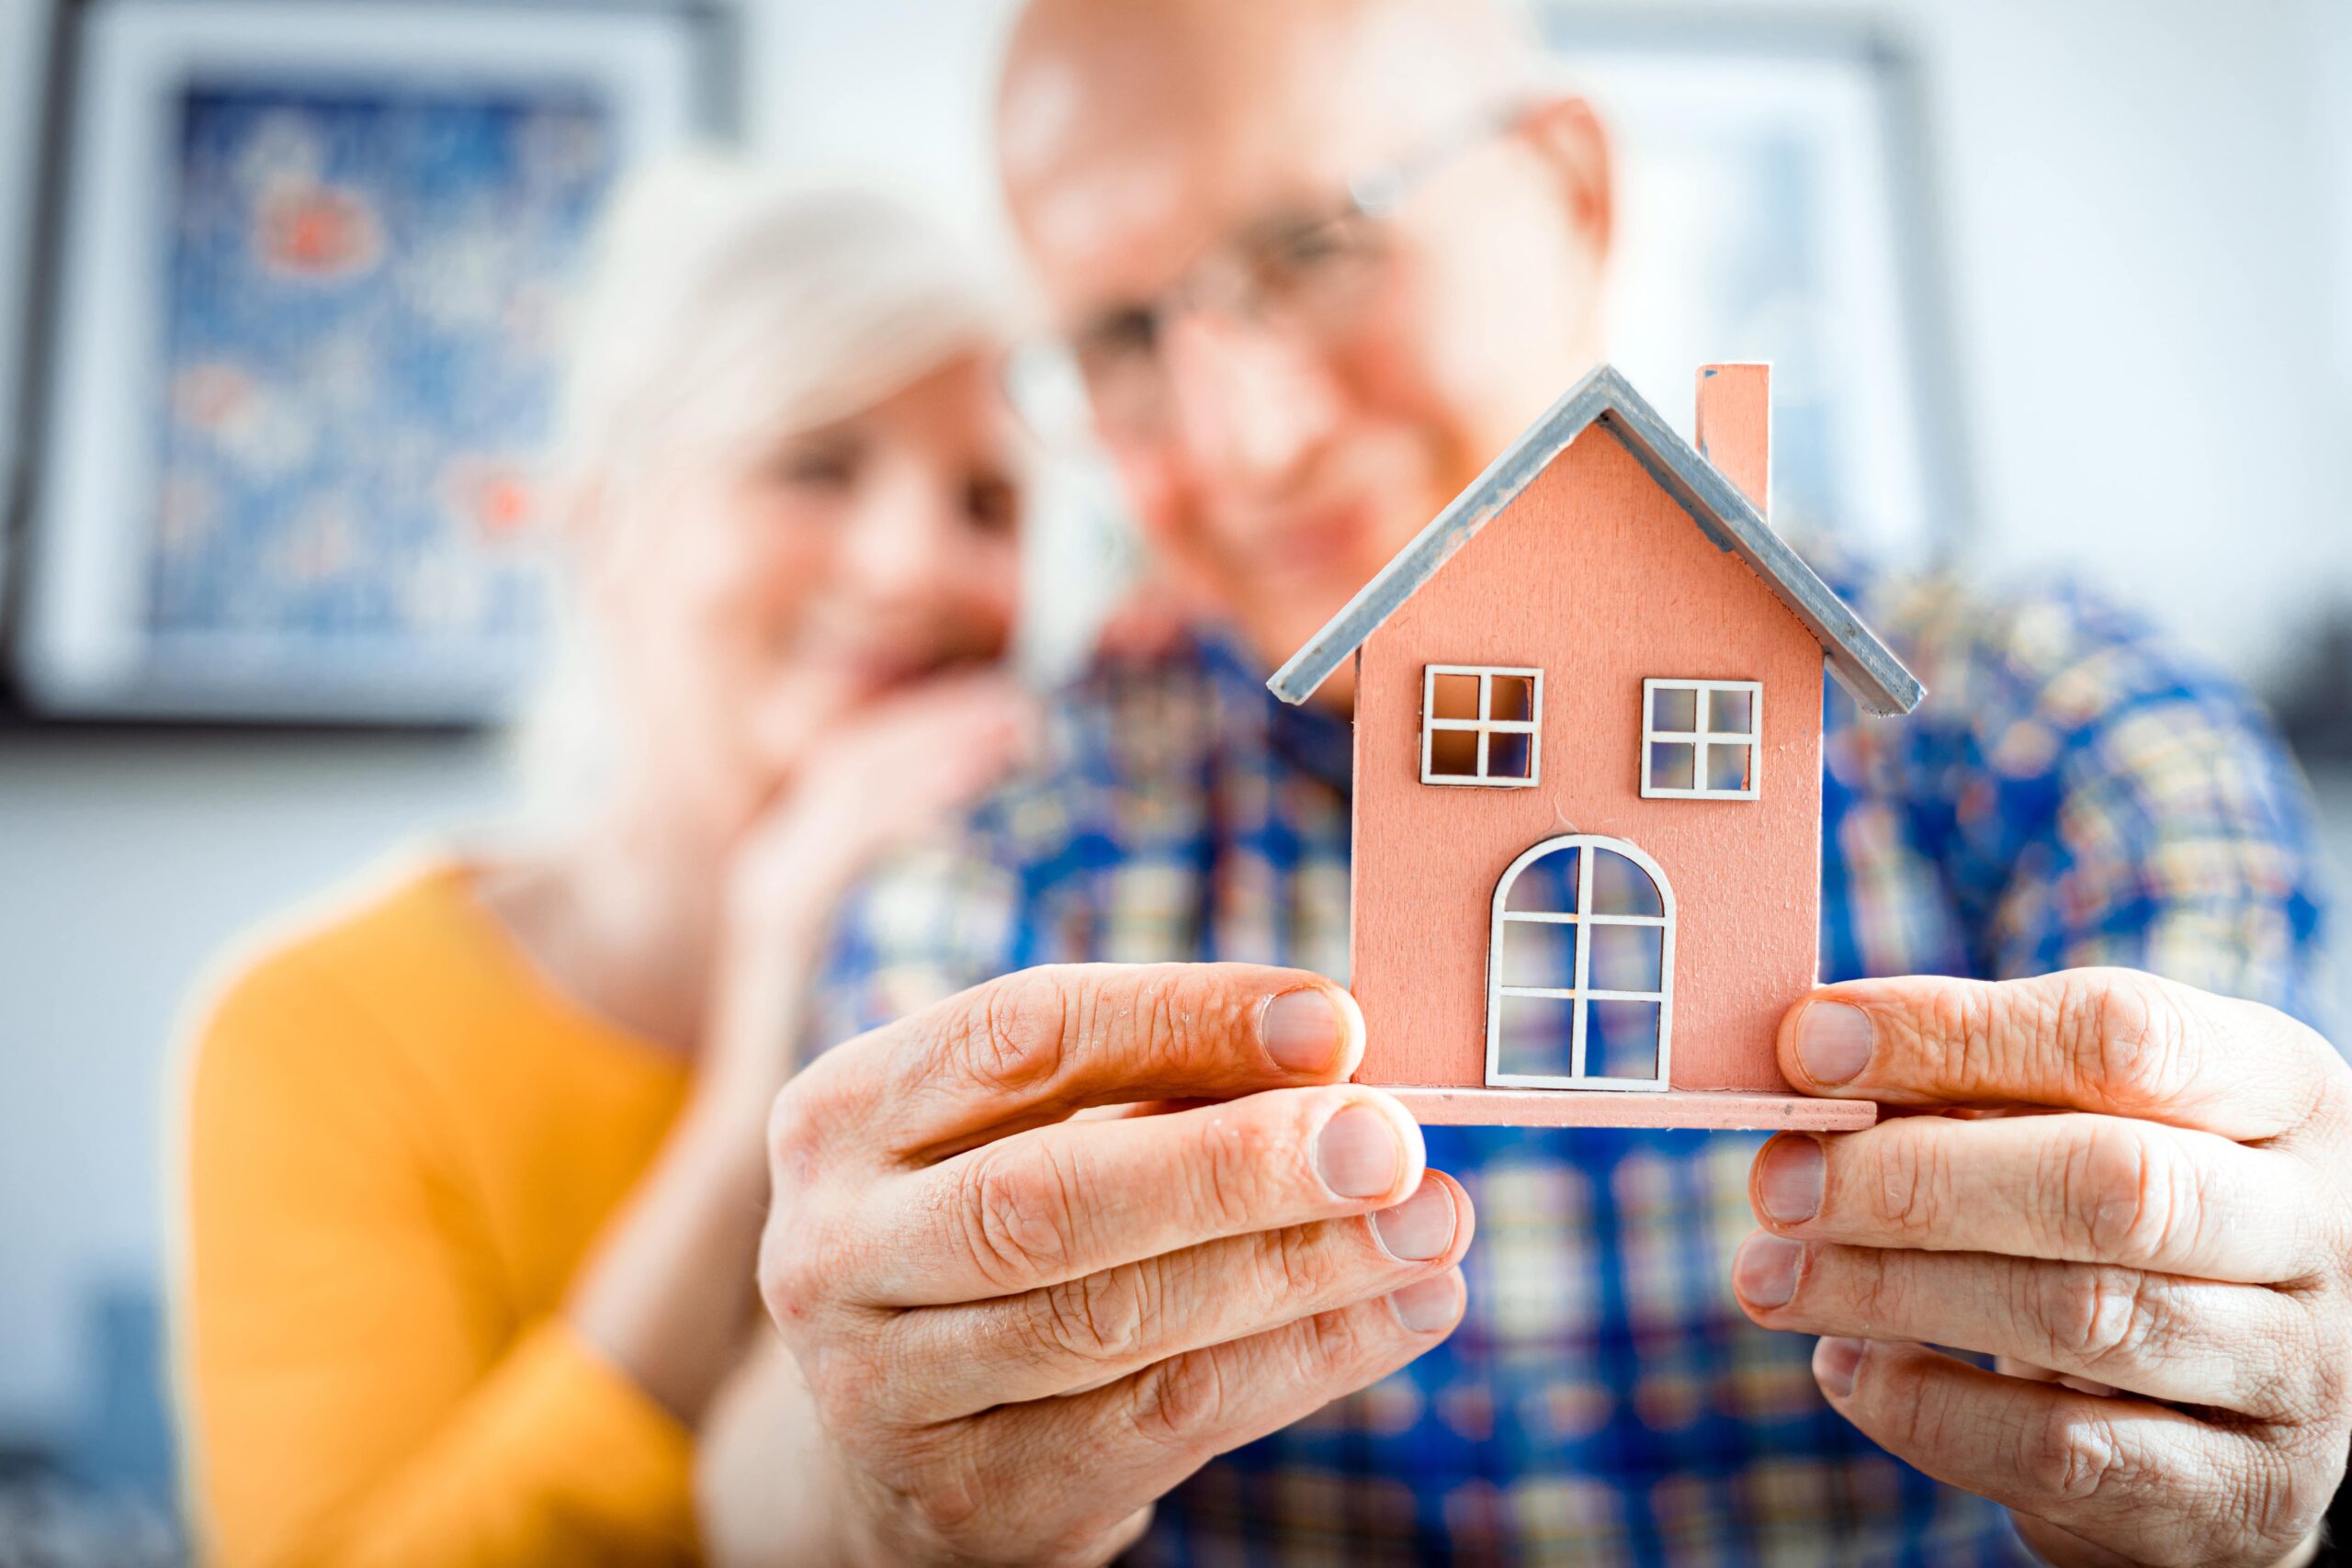 Moving to a retirement community? Here are 4 tips for an easier transition